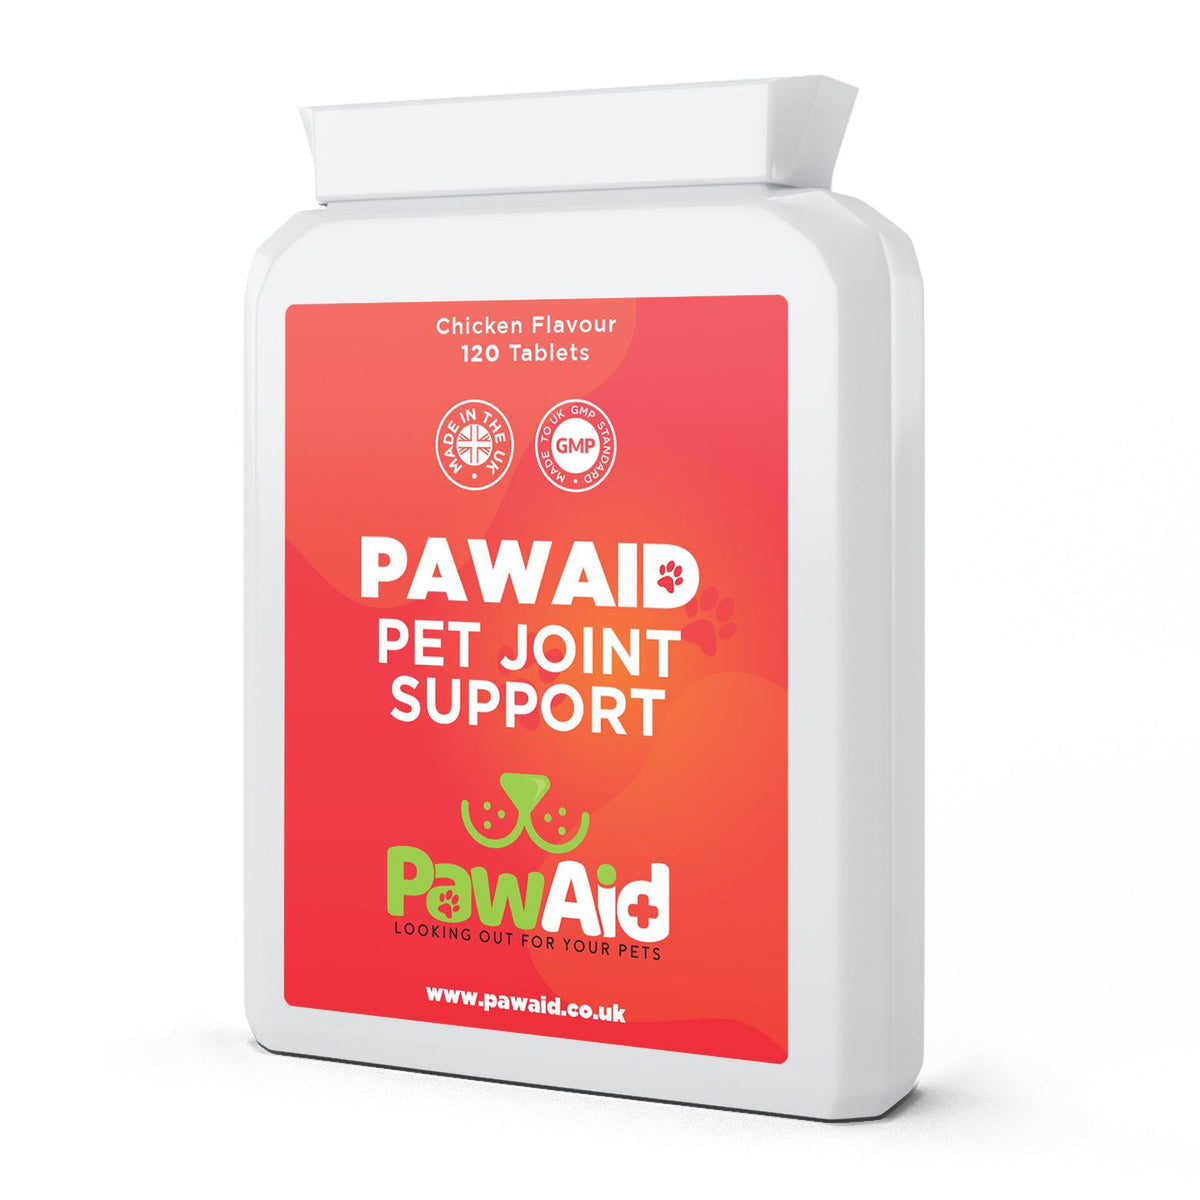 PawAid Pet Joint Support Chicken Flavour 120 Tablets